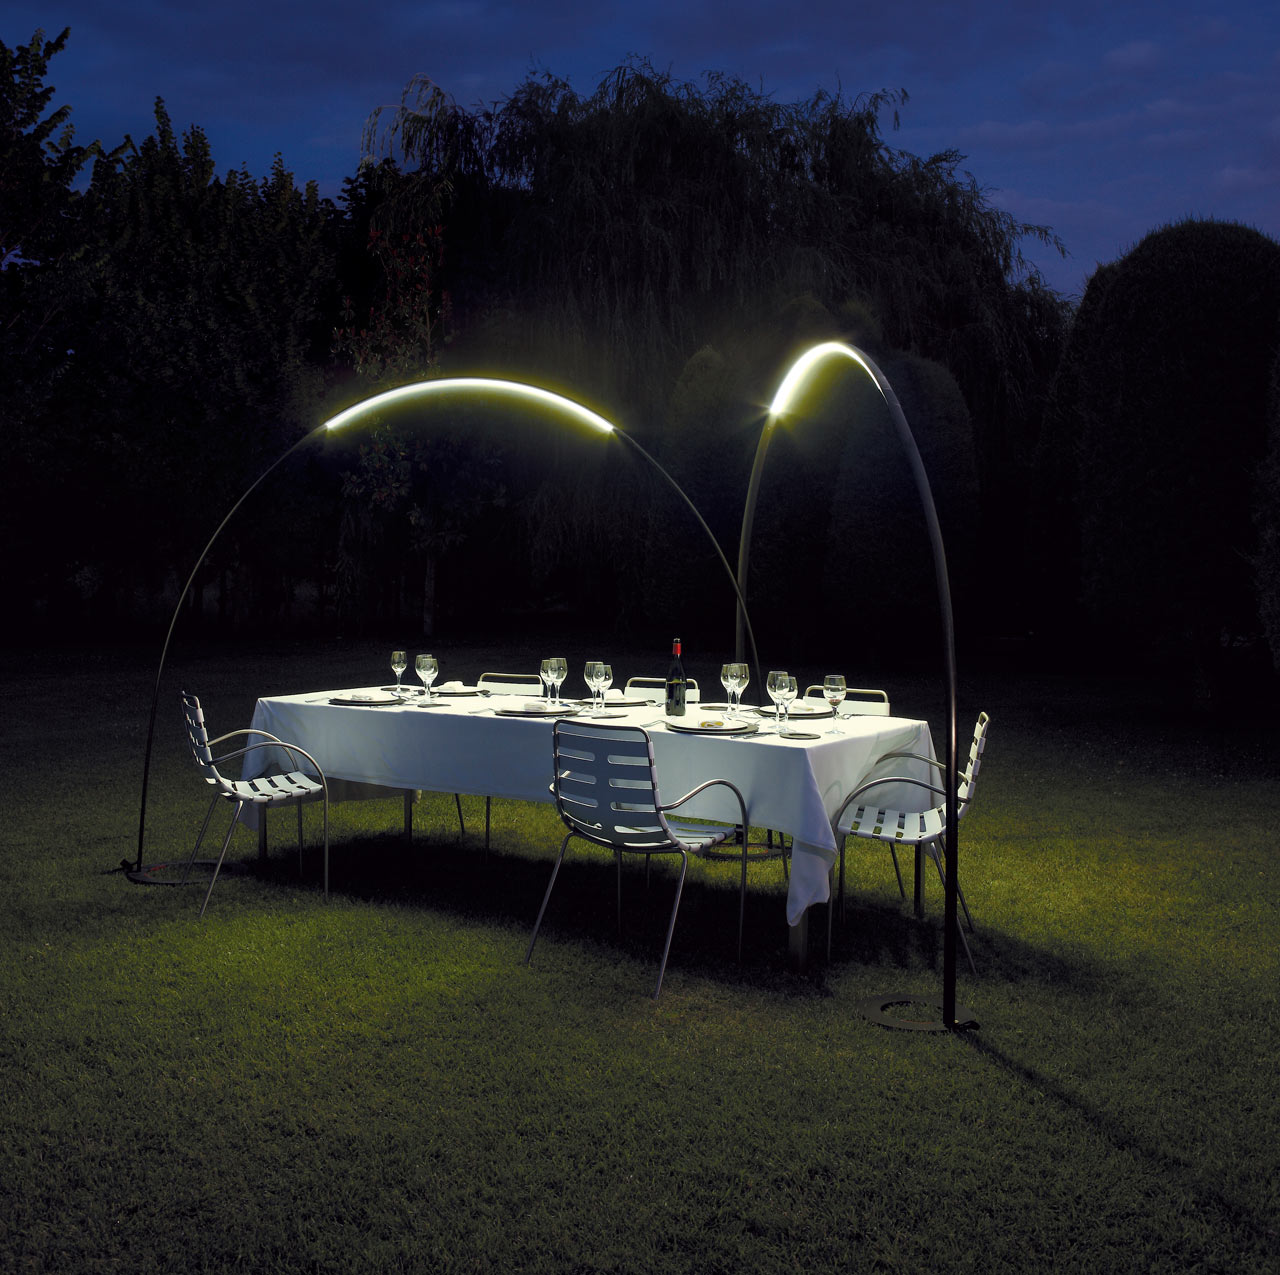 Halley Produces an Arc of Light for Outdoors